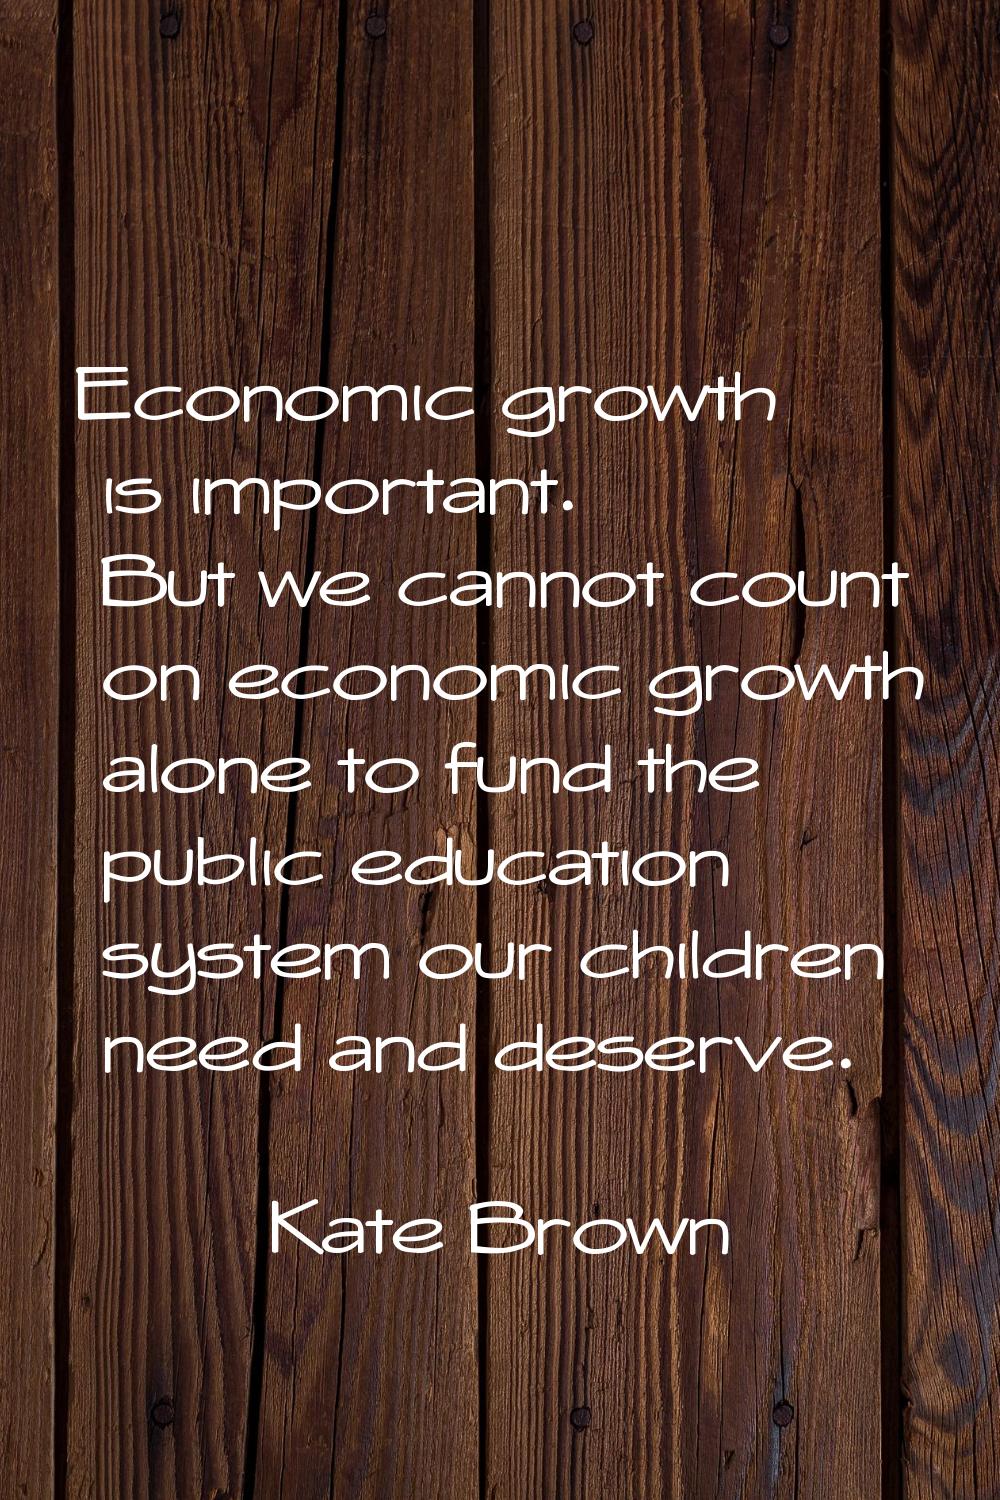 Economic growth is important. But we cannot count on economic growth alone to fund the public educa